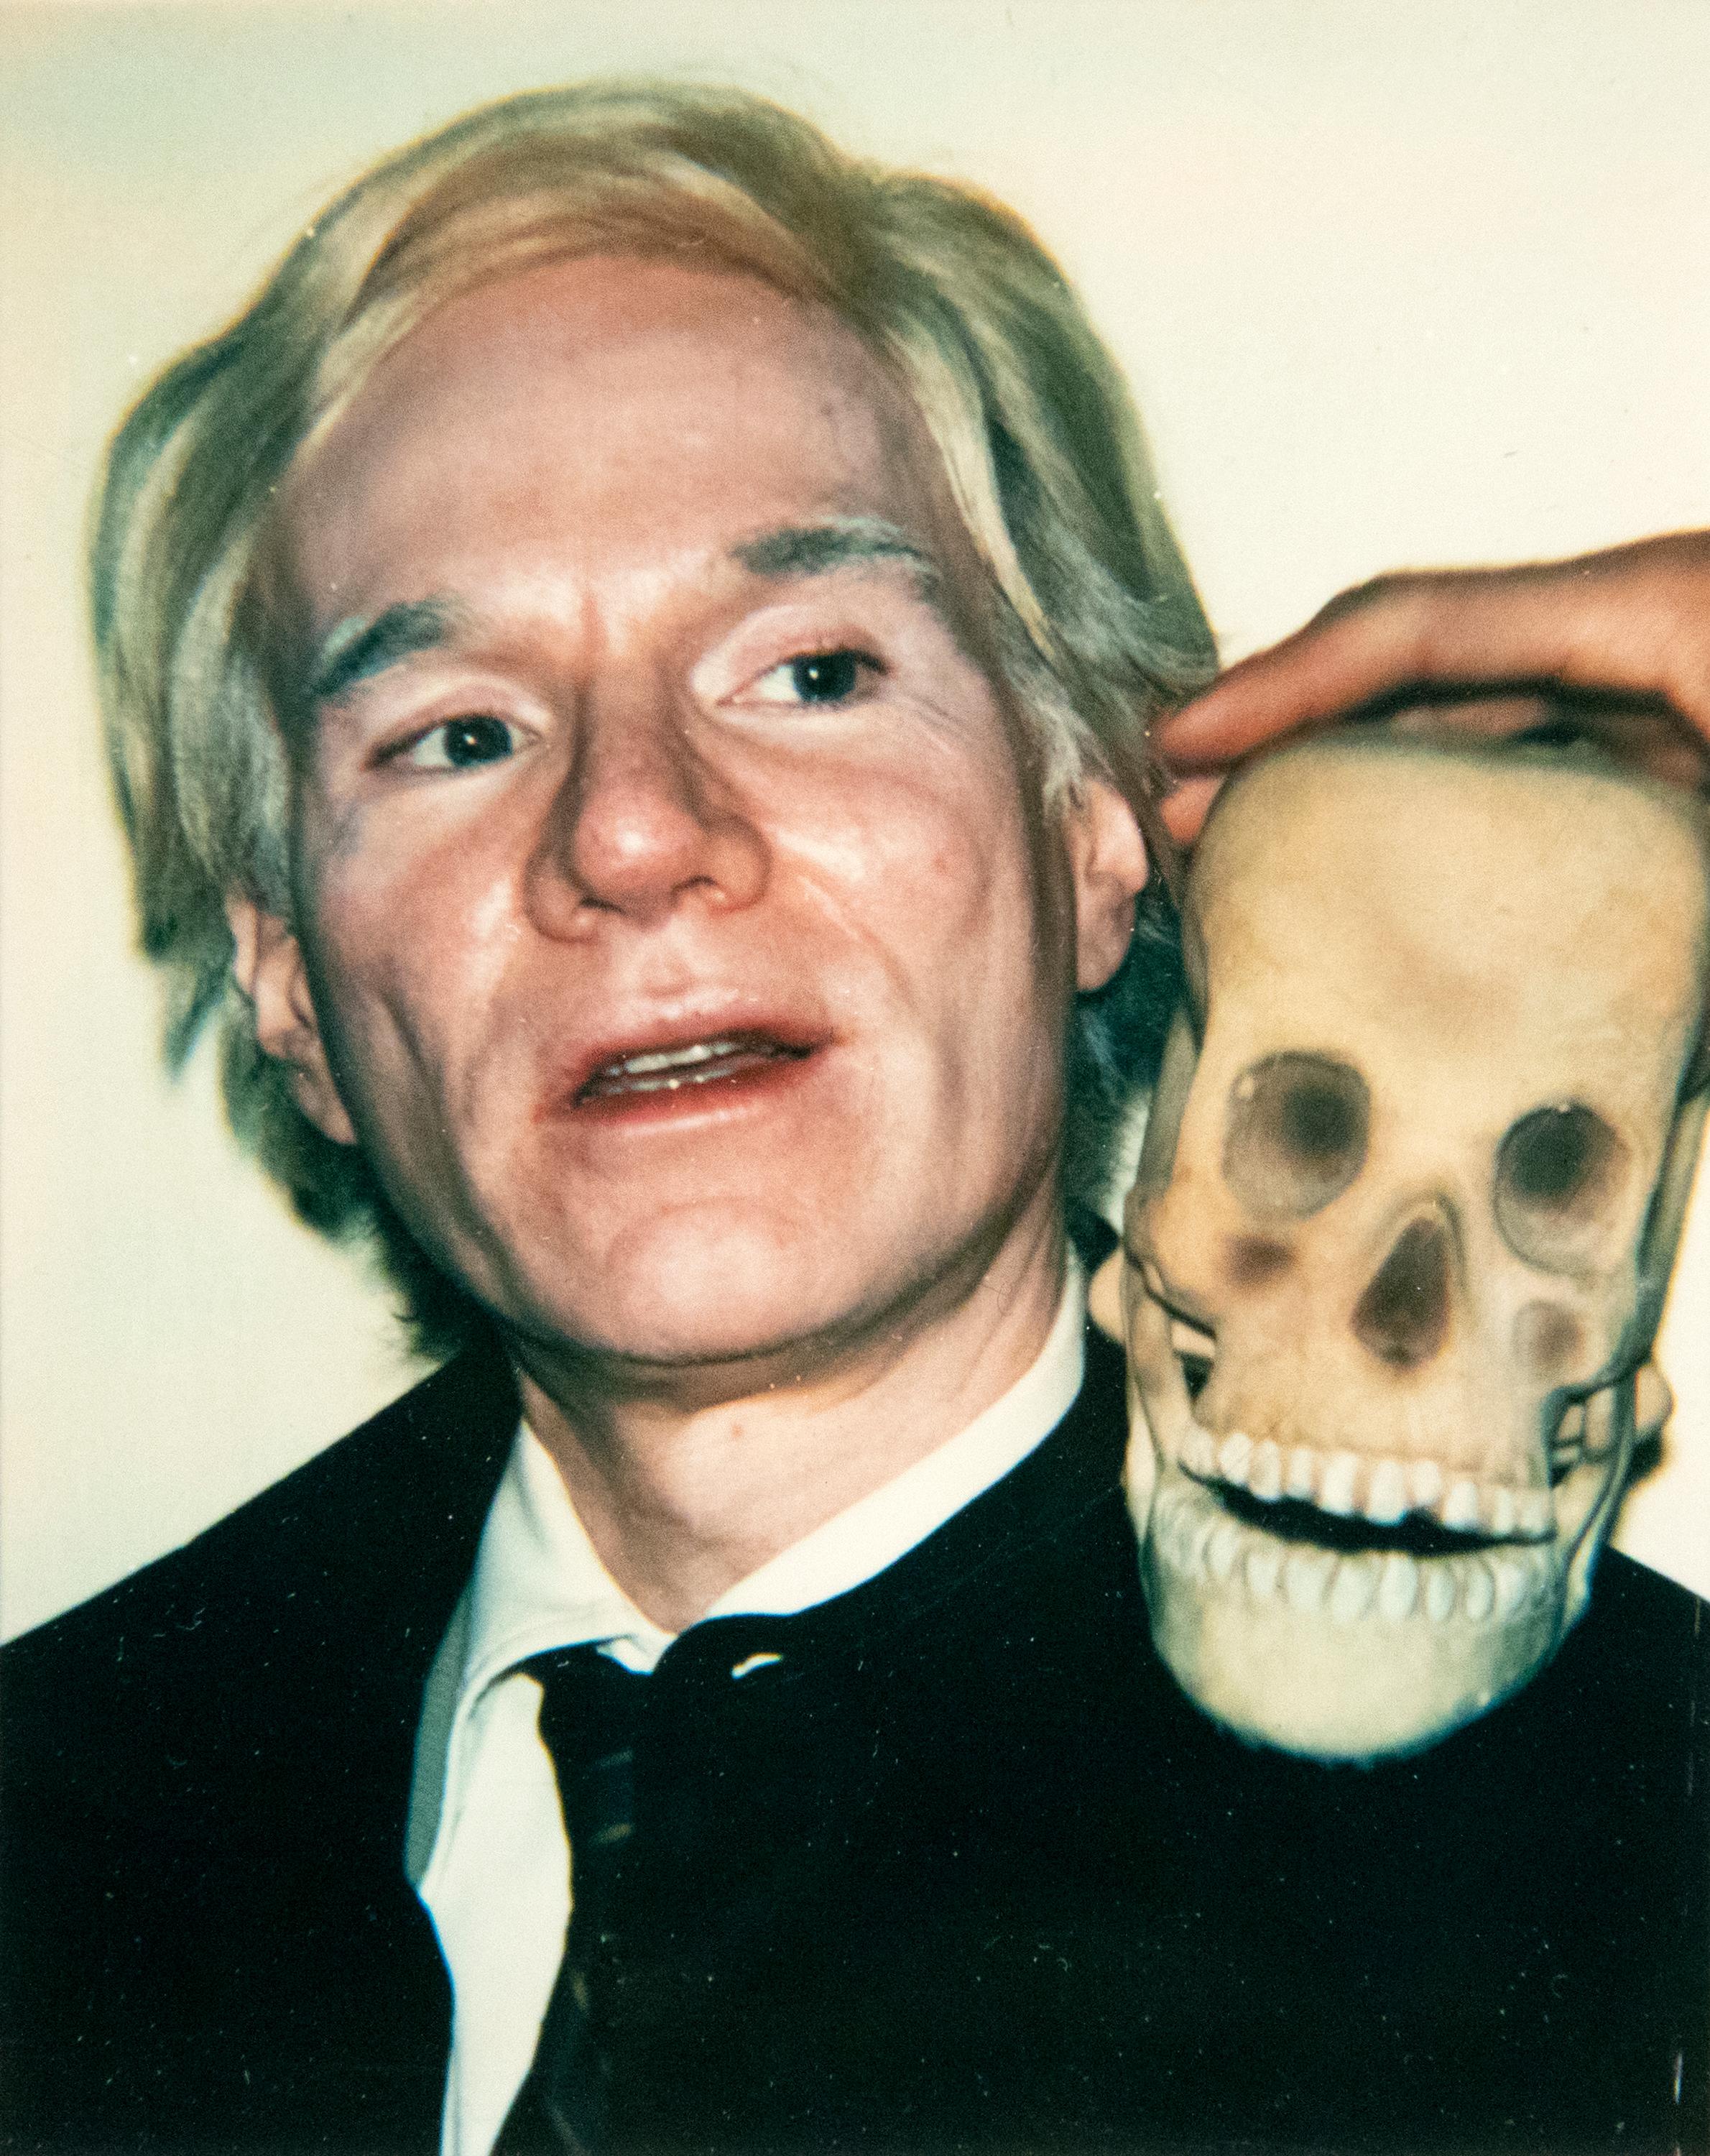 Andy Warhol Color Photograph - Self-Portrait with Skull